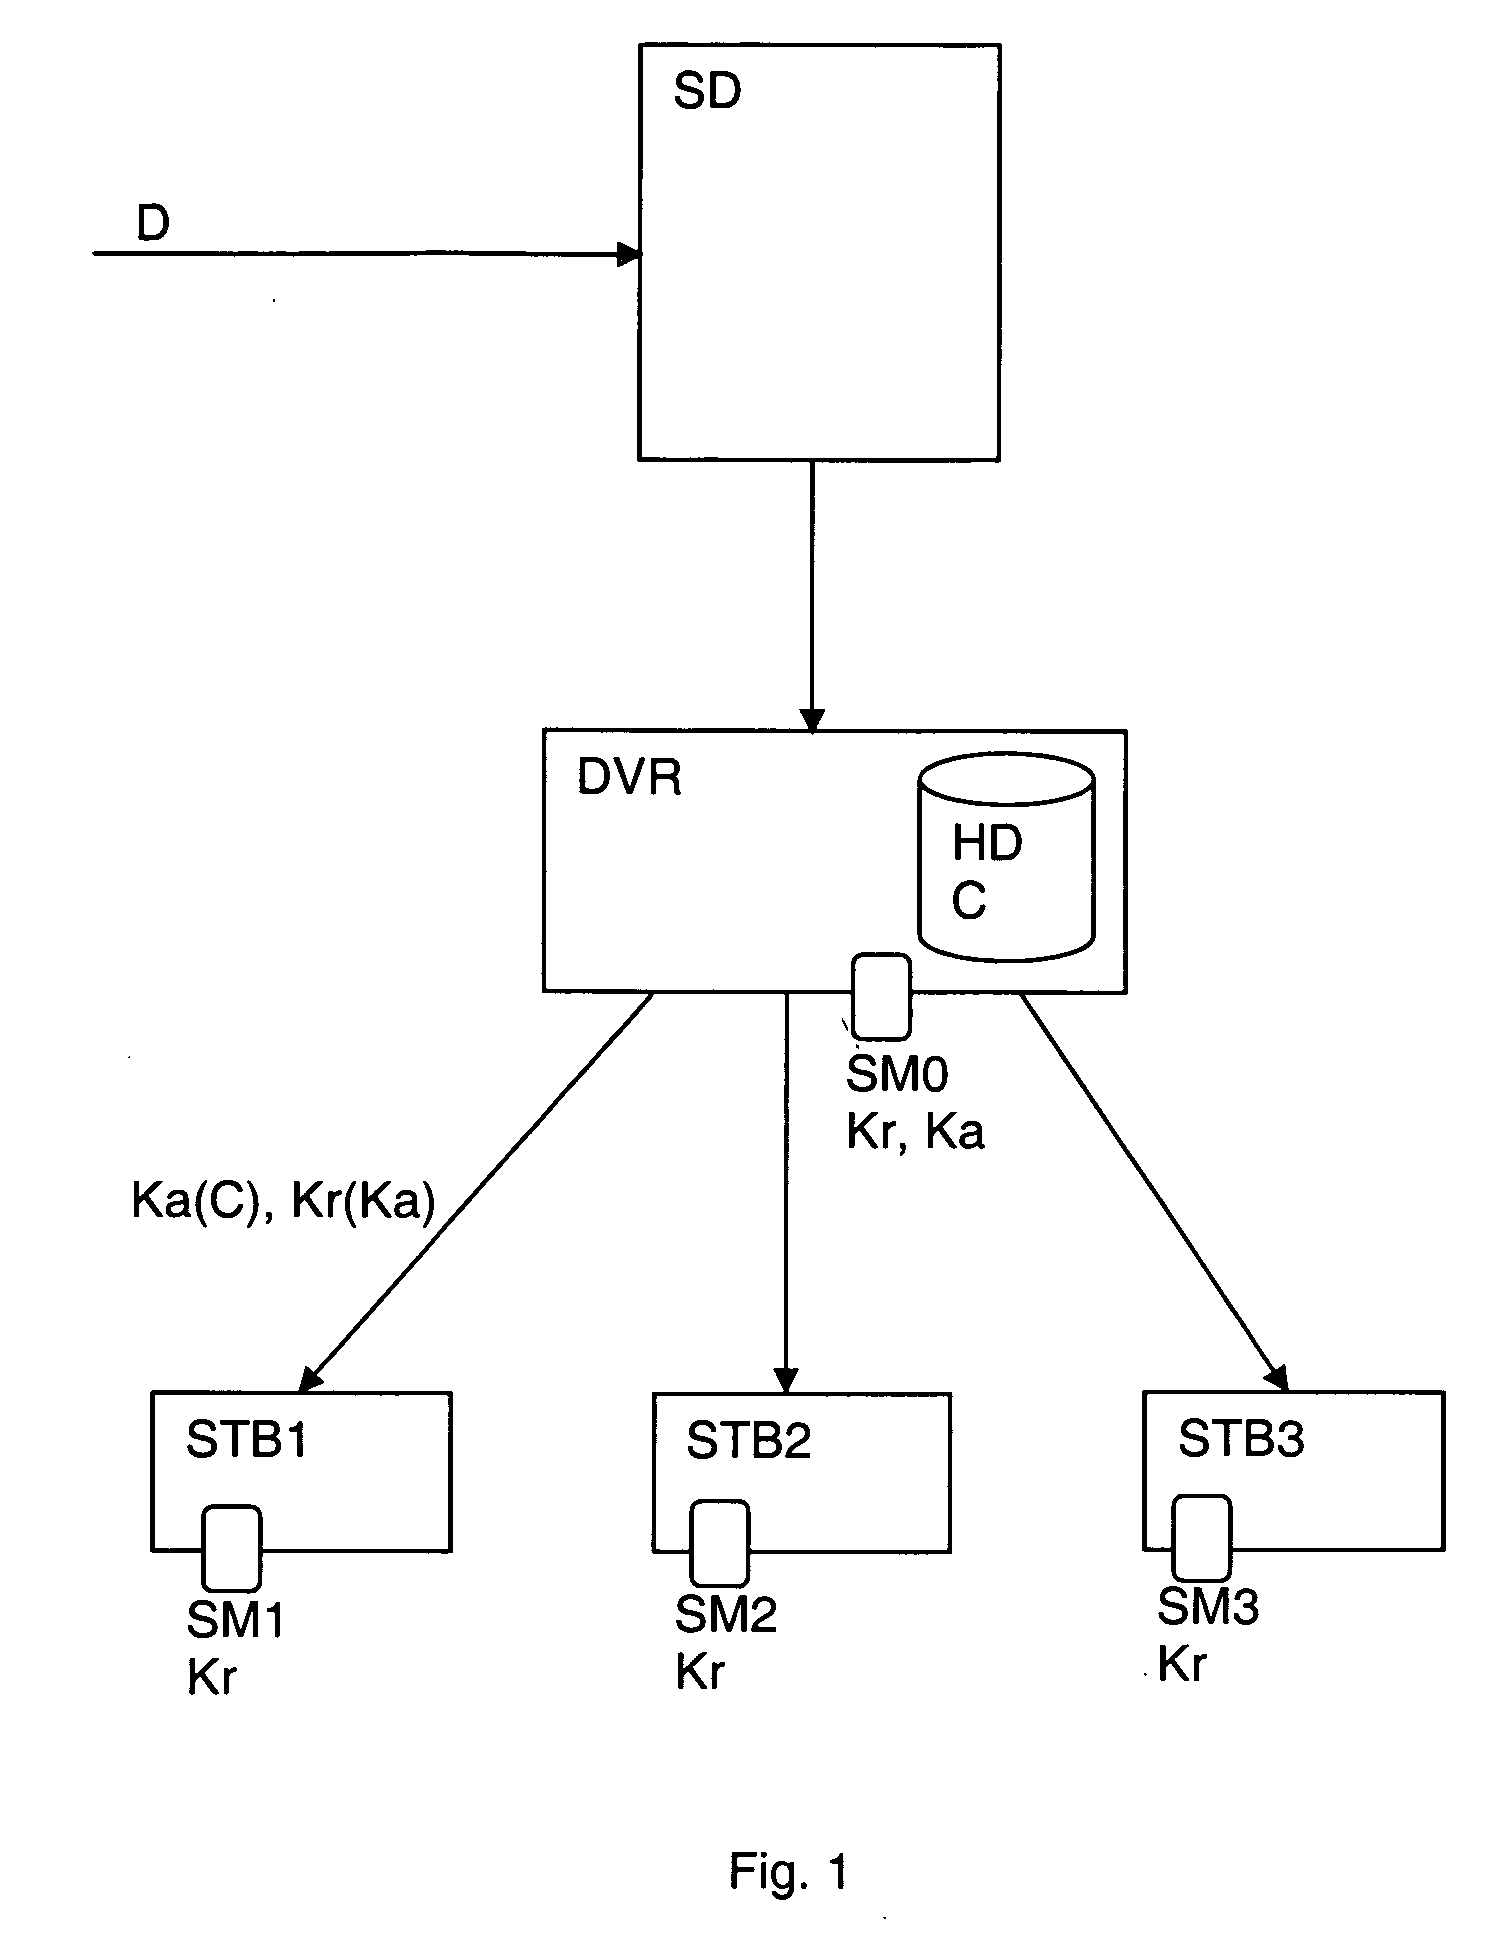 Method for transmitting digital data in a local network